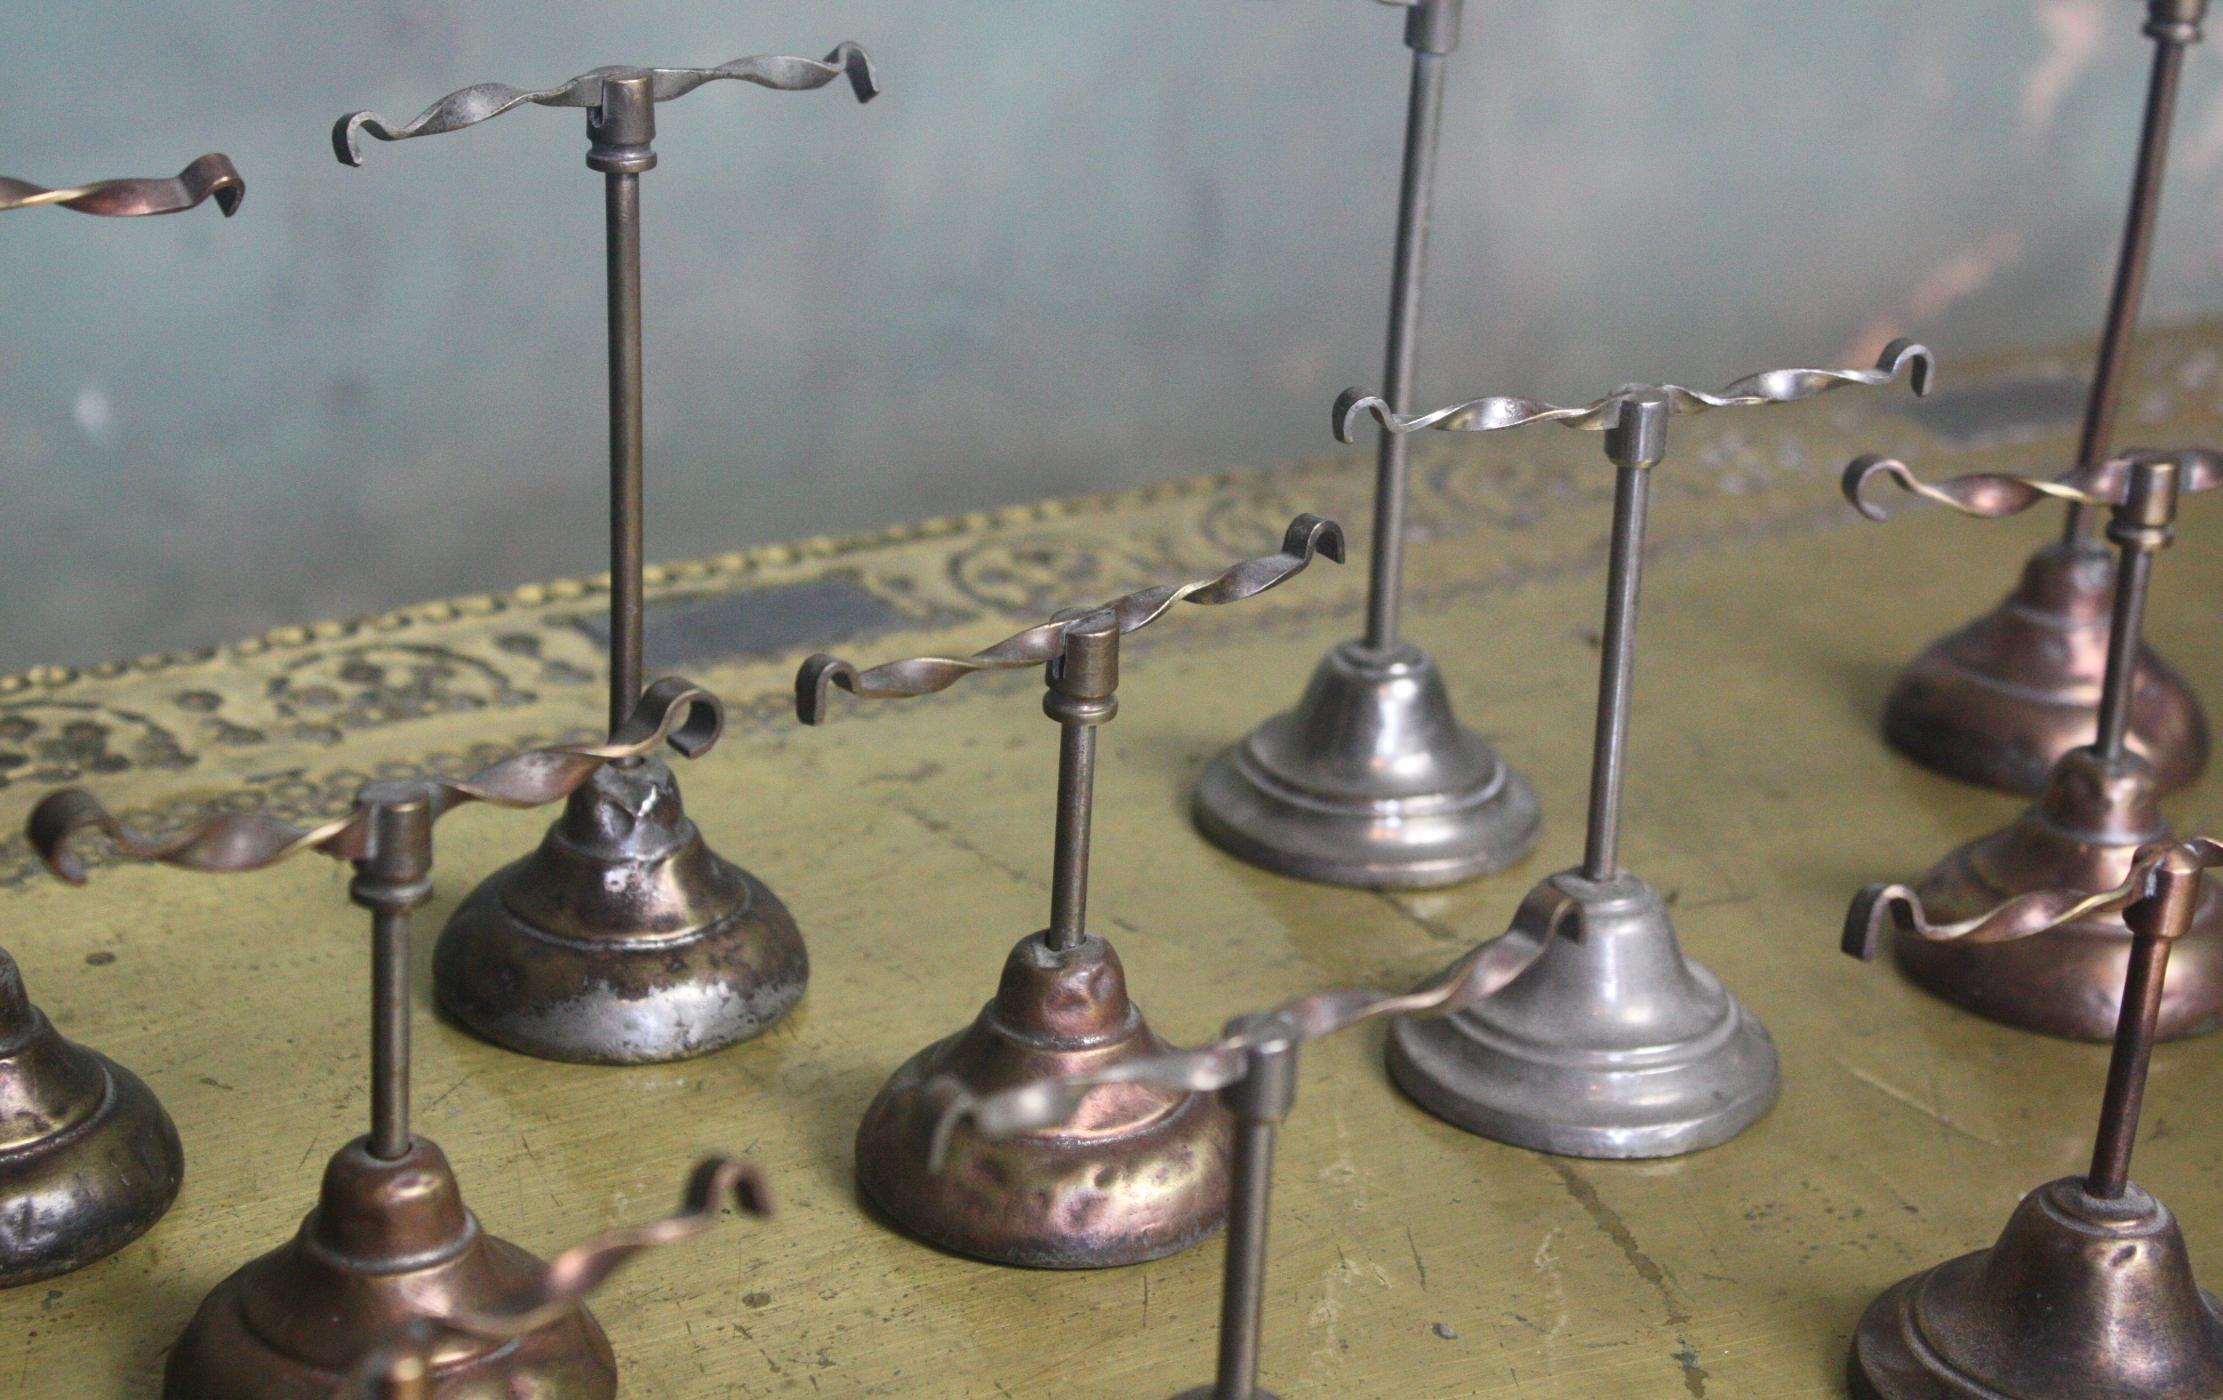 A fine collection of Edwardian shoe stands 

These would of sat upon counter tops and in windows showcasing the latest shoes available to the public

Made from, copper, brass and nickle plate 

Price is for the collection of 16 

4 pairs of